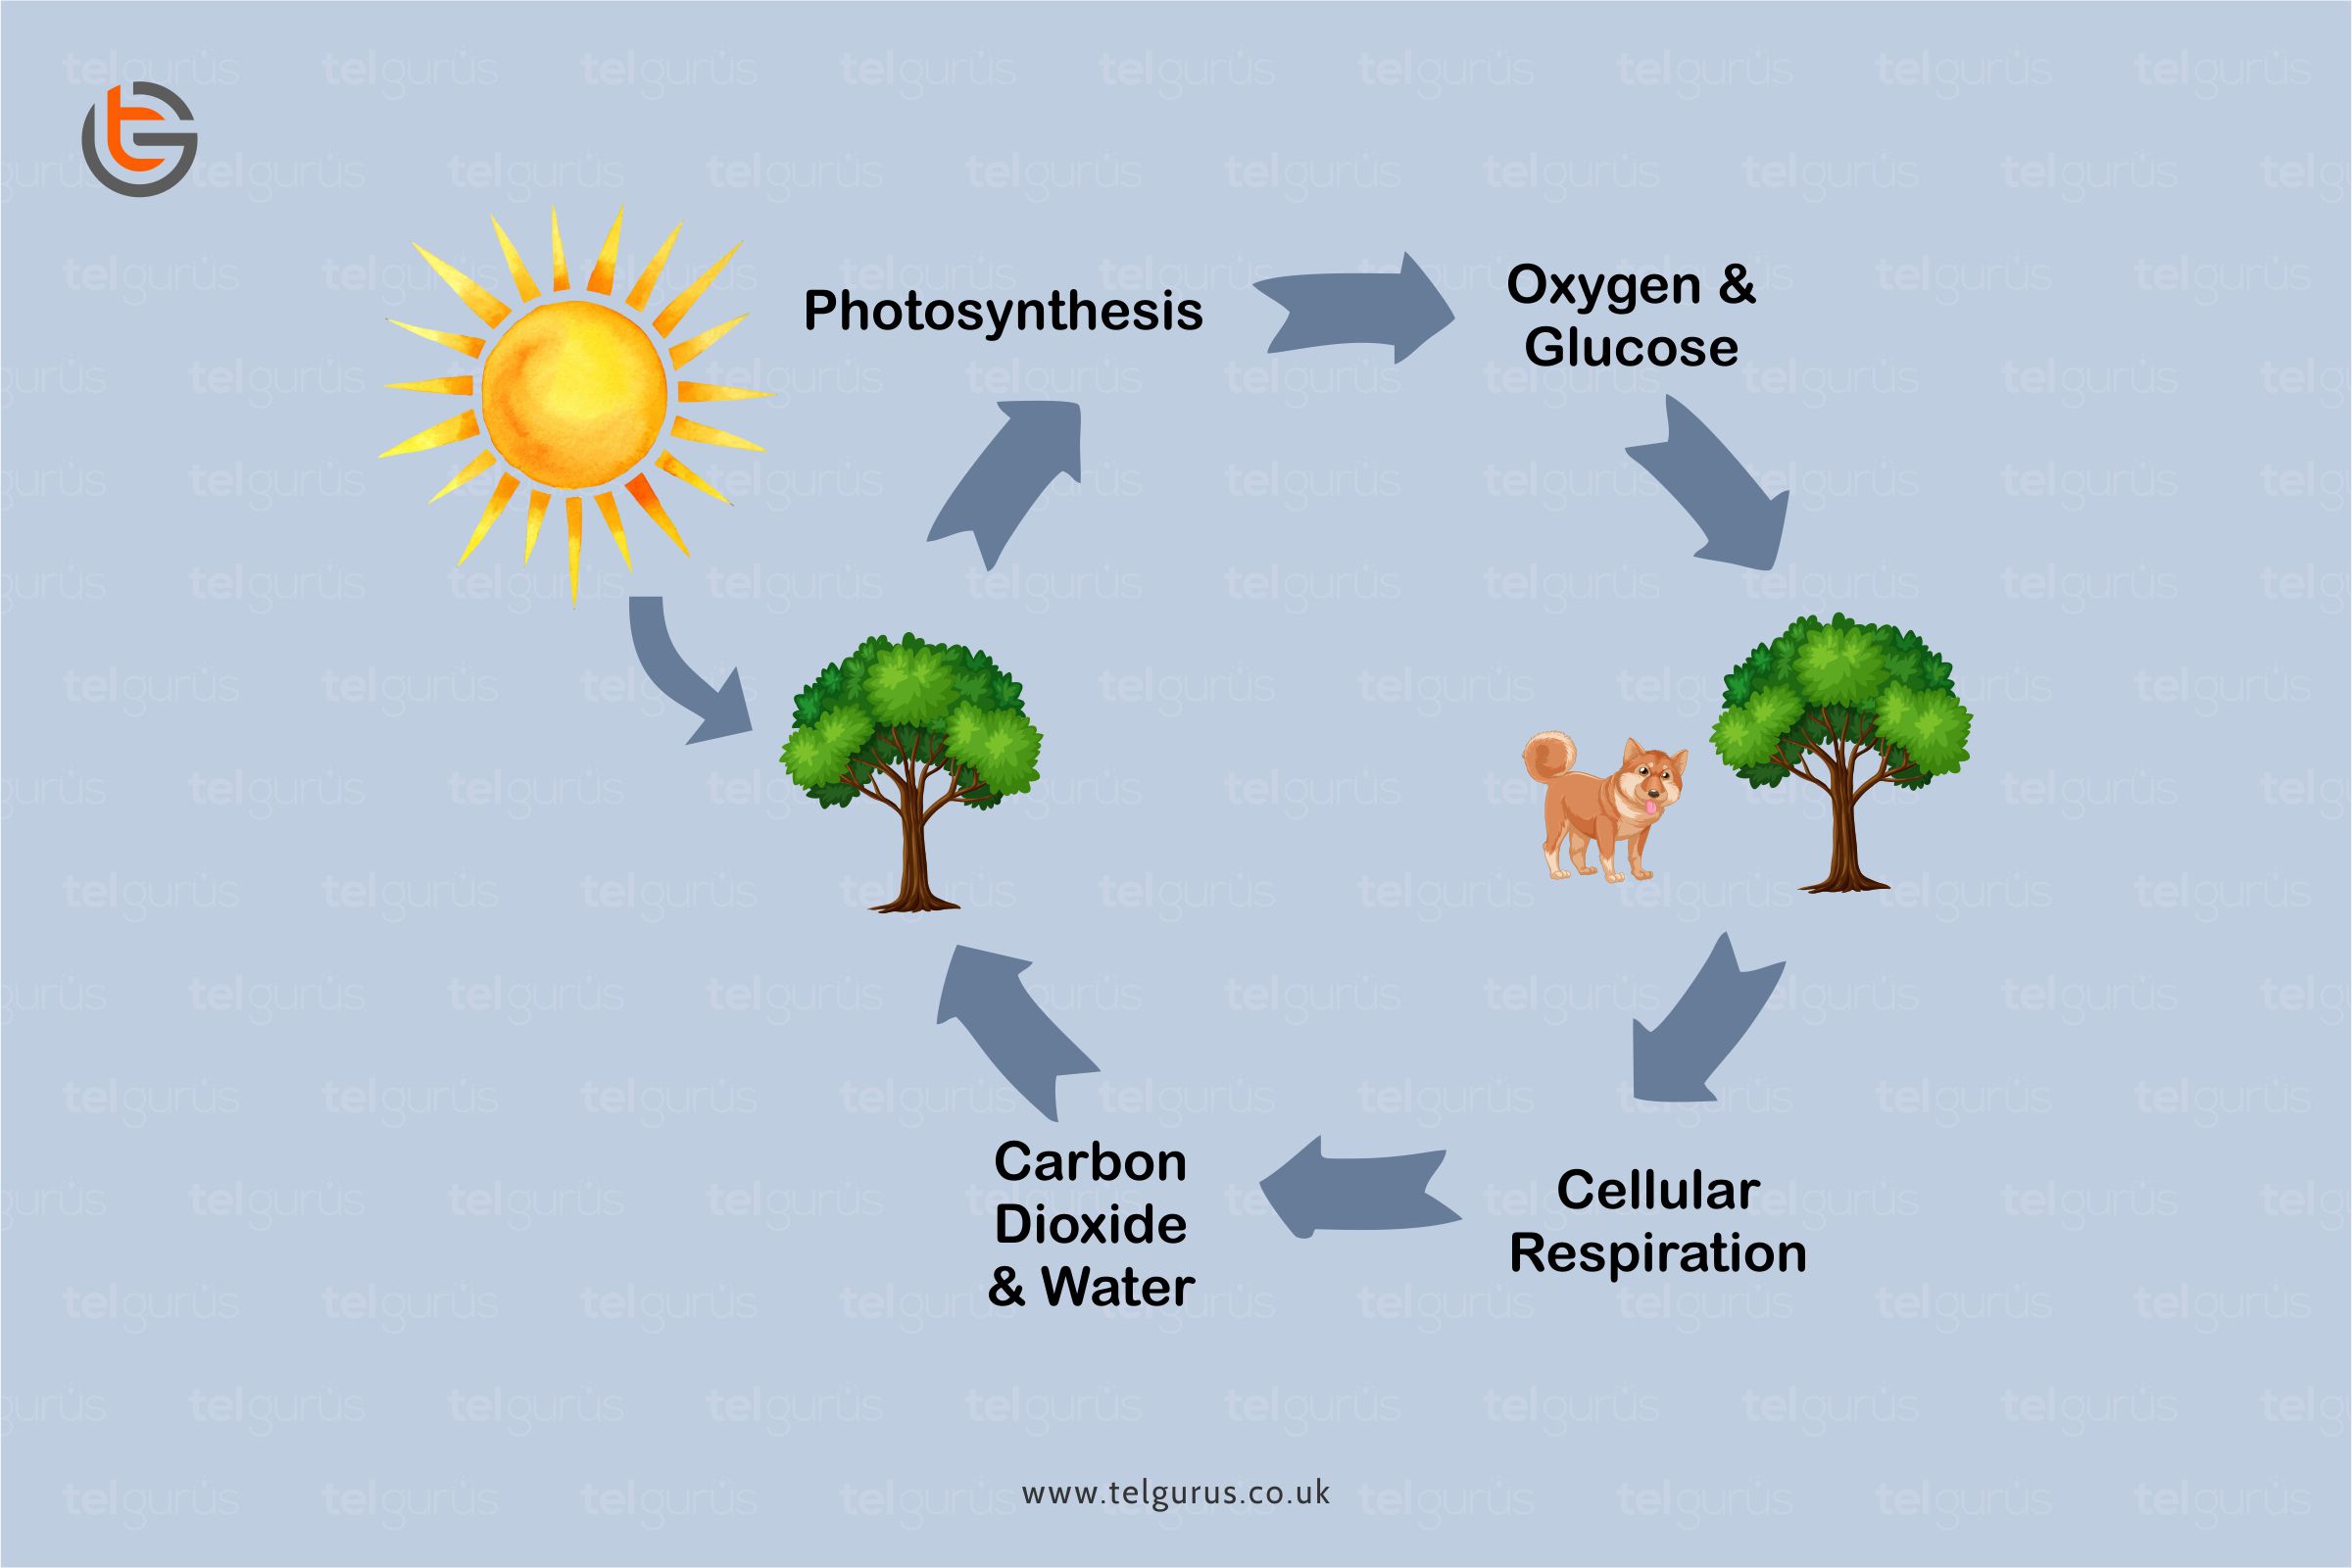 Describe the similarities between photosynthesis and respiration.